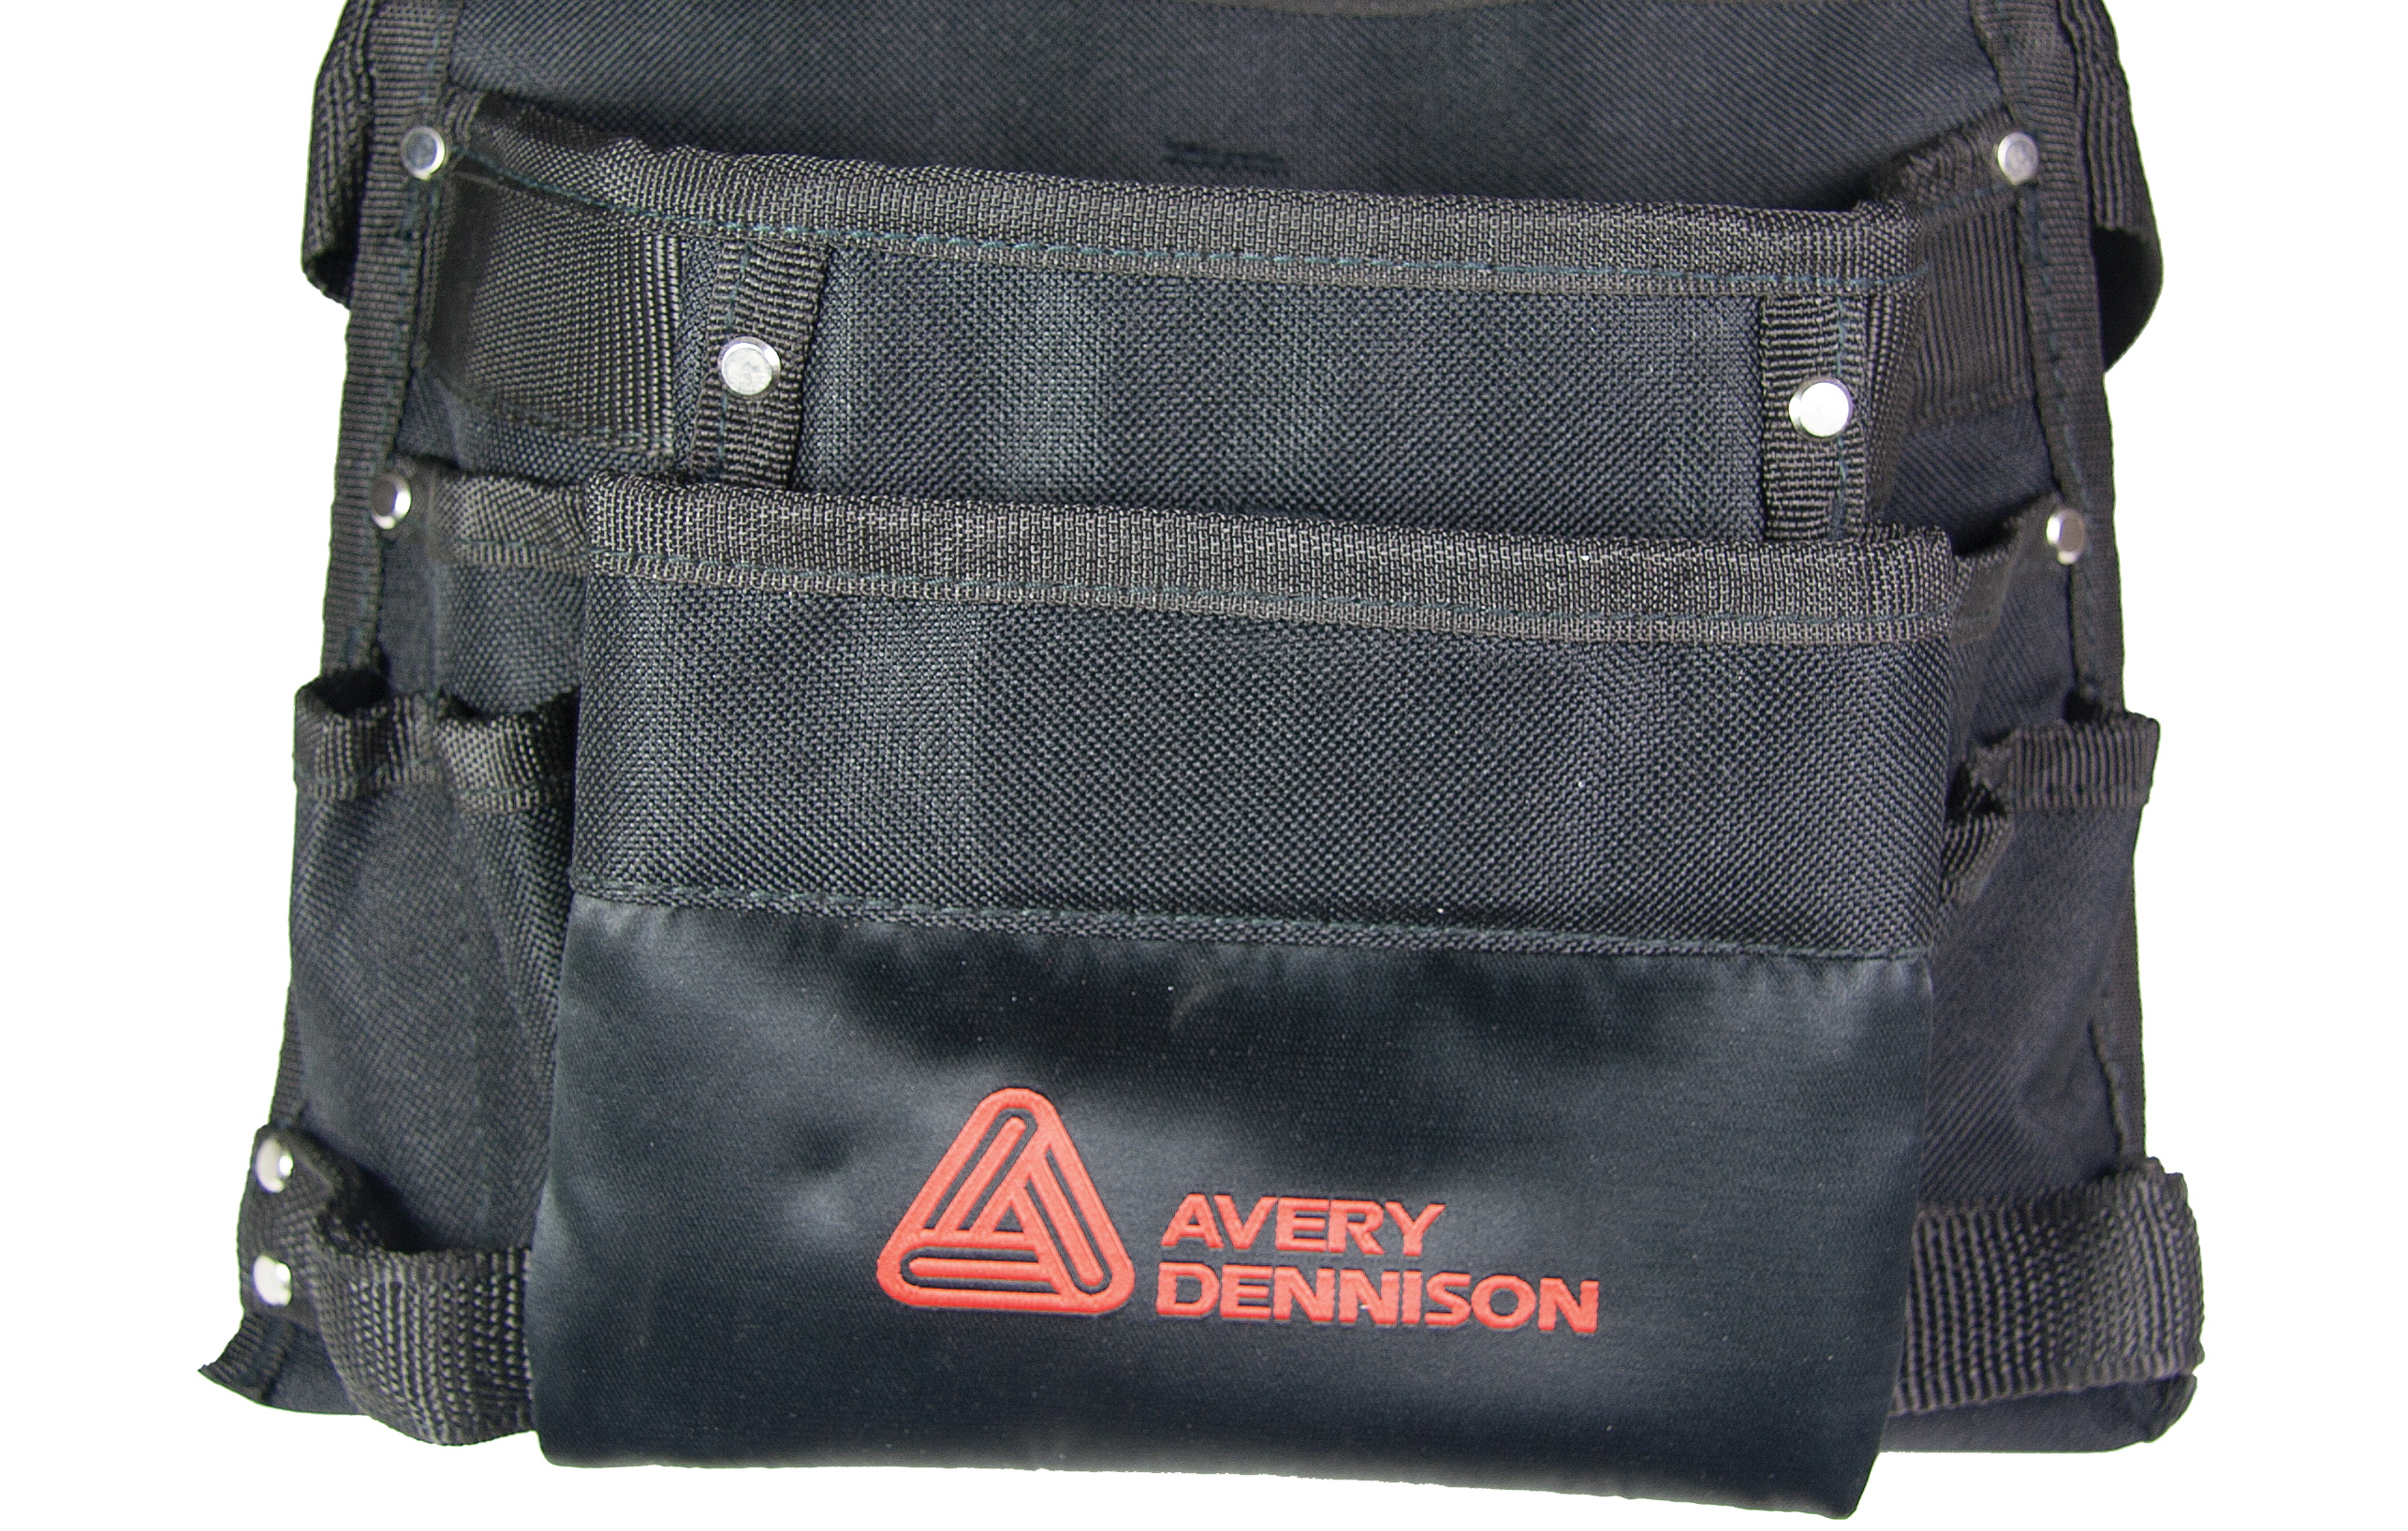 Vinyl Wrapping Application Tools, Avery Dennison